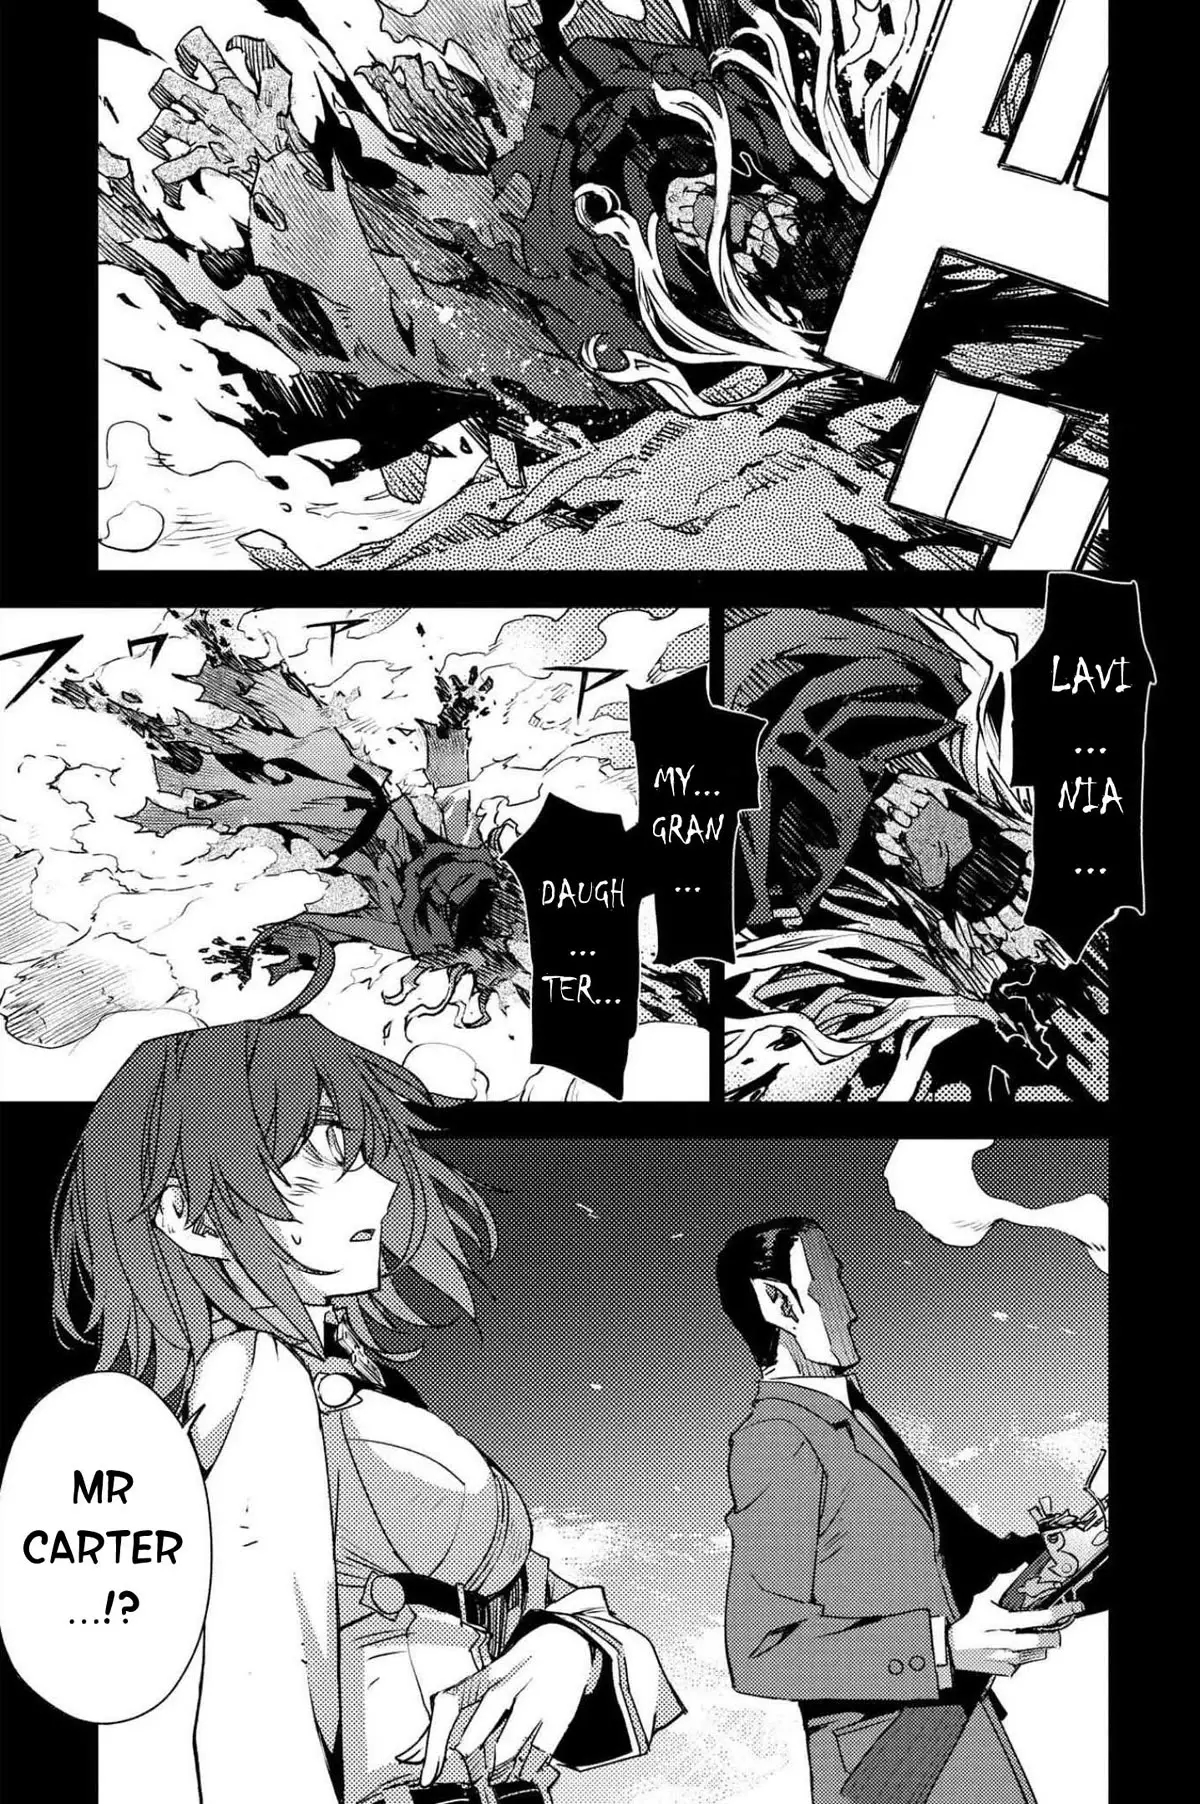 Fate/grand Order: Epic Of Remnant - Subspecies Singularity Iv: Taboo Advent Salem: Salem Of Heresy - 25 page 22-2e3ee87c